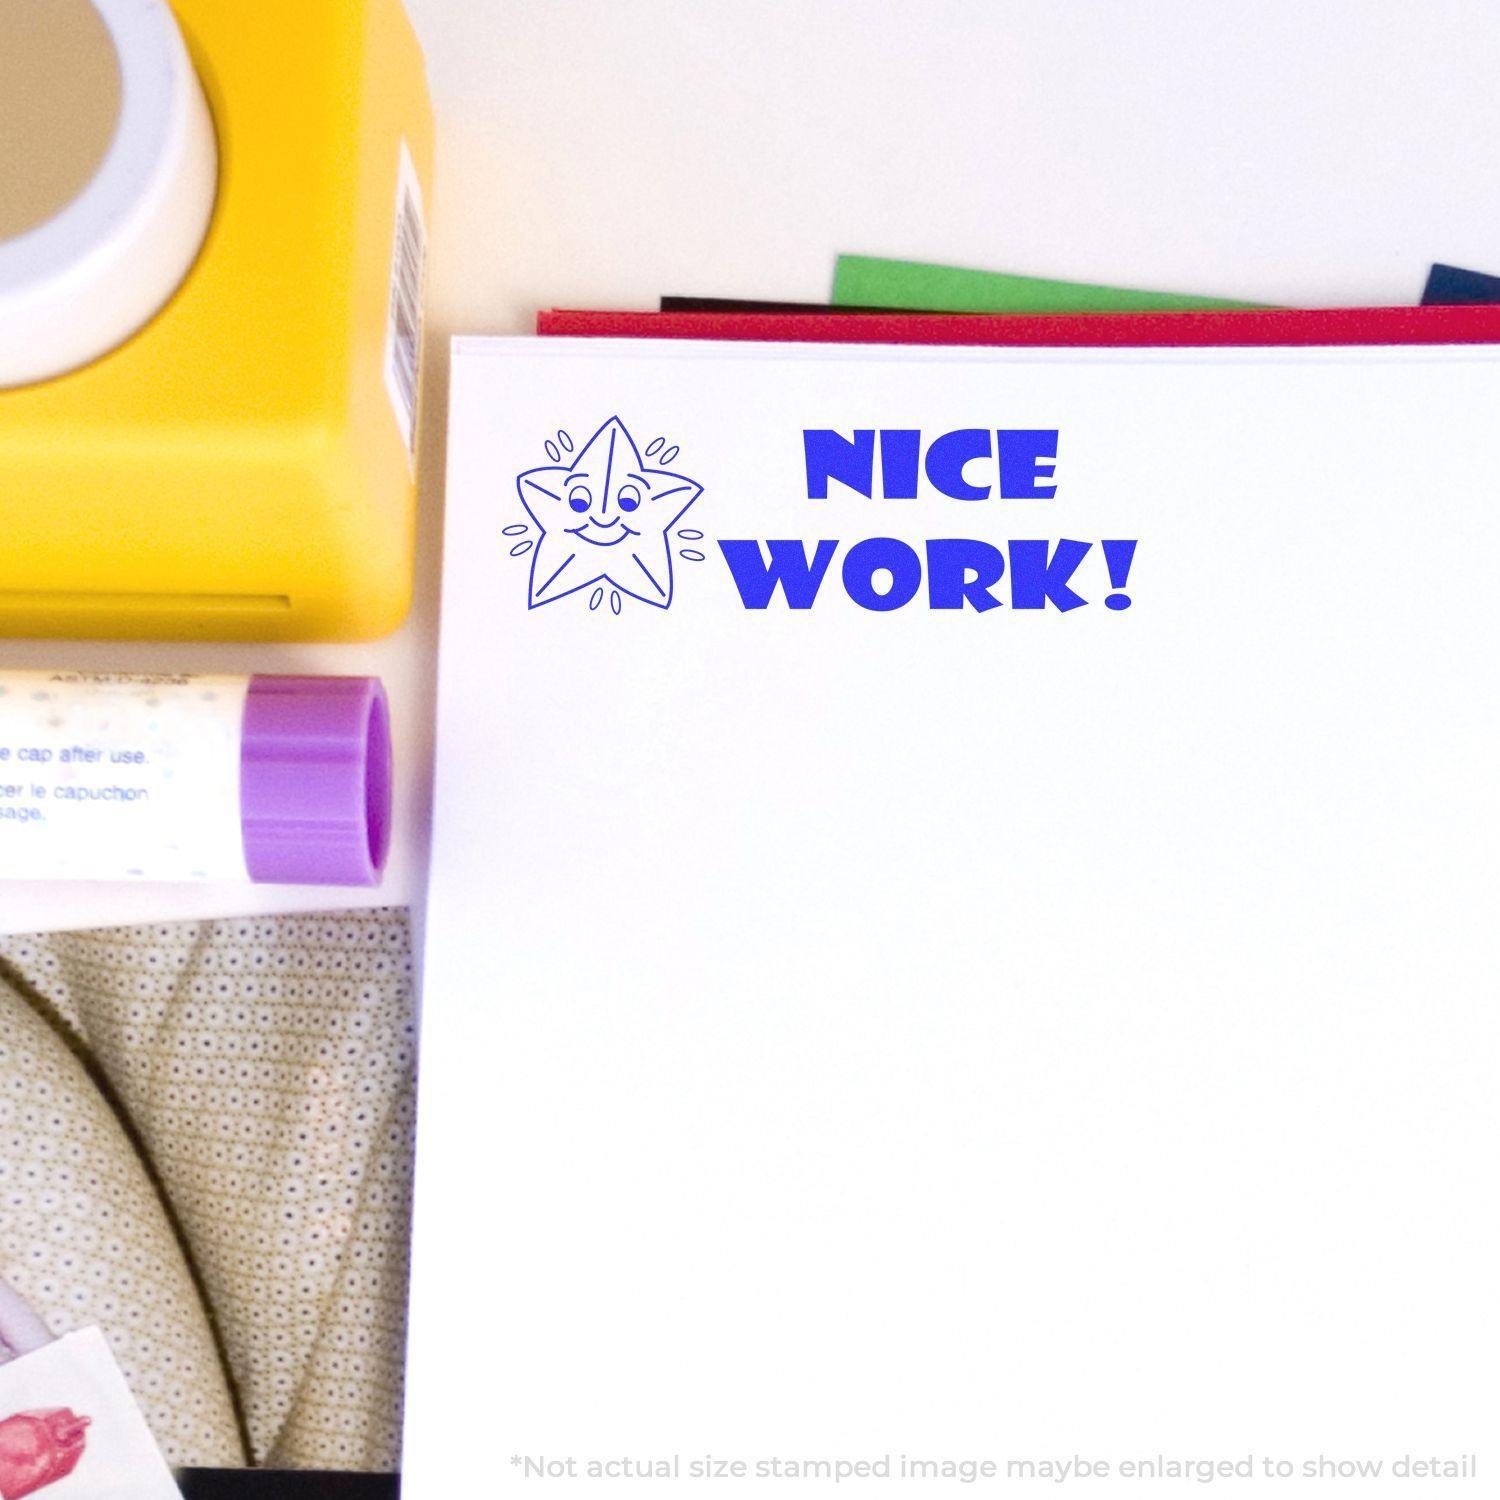 A stock office rubber stamp with a stamped image showing how the text "NICE WORK!" in a large bold font with an image of a smiling starfish on the left side is displayed after stamping.